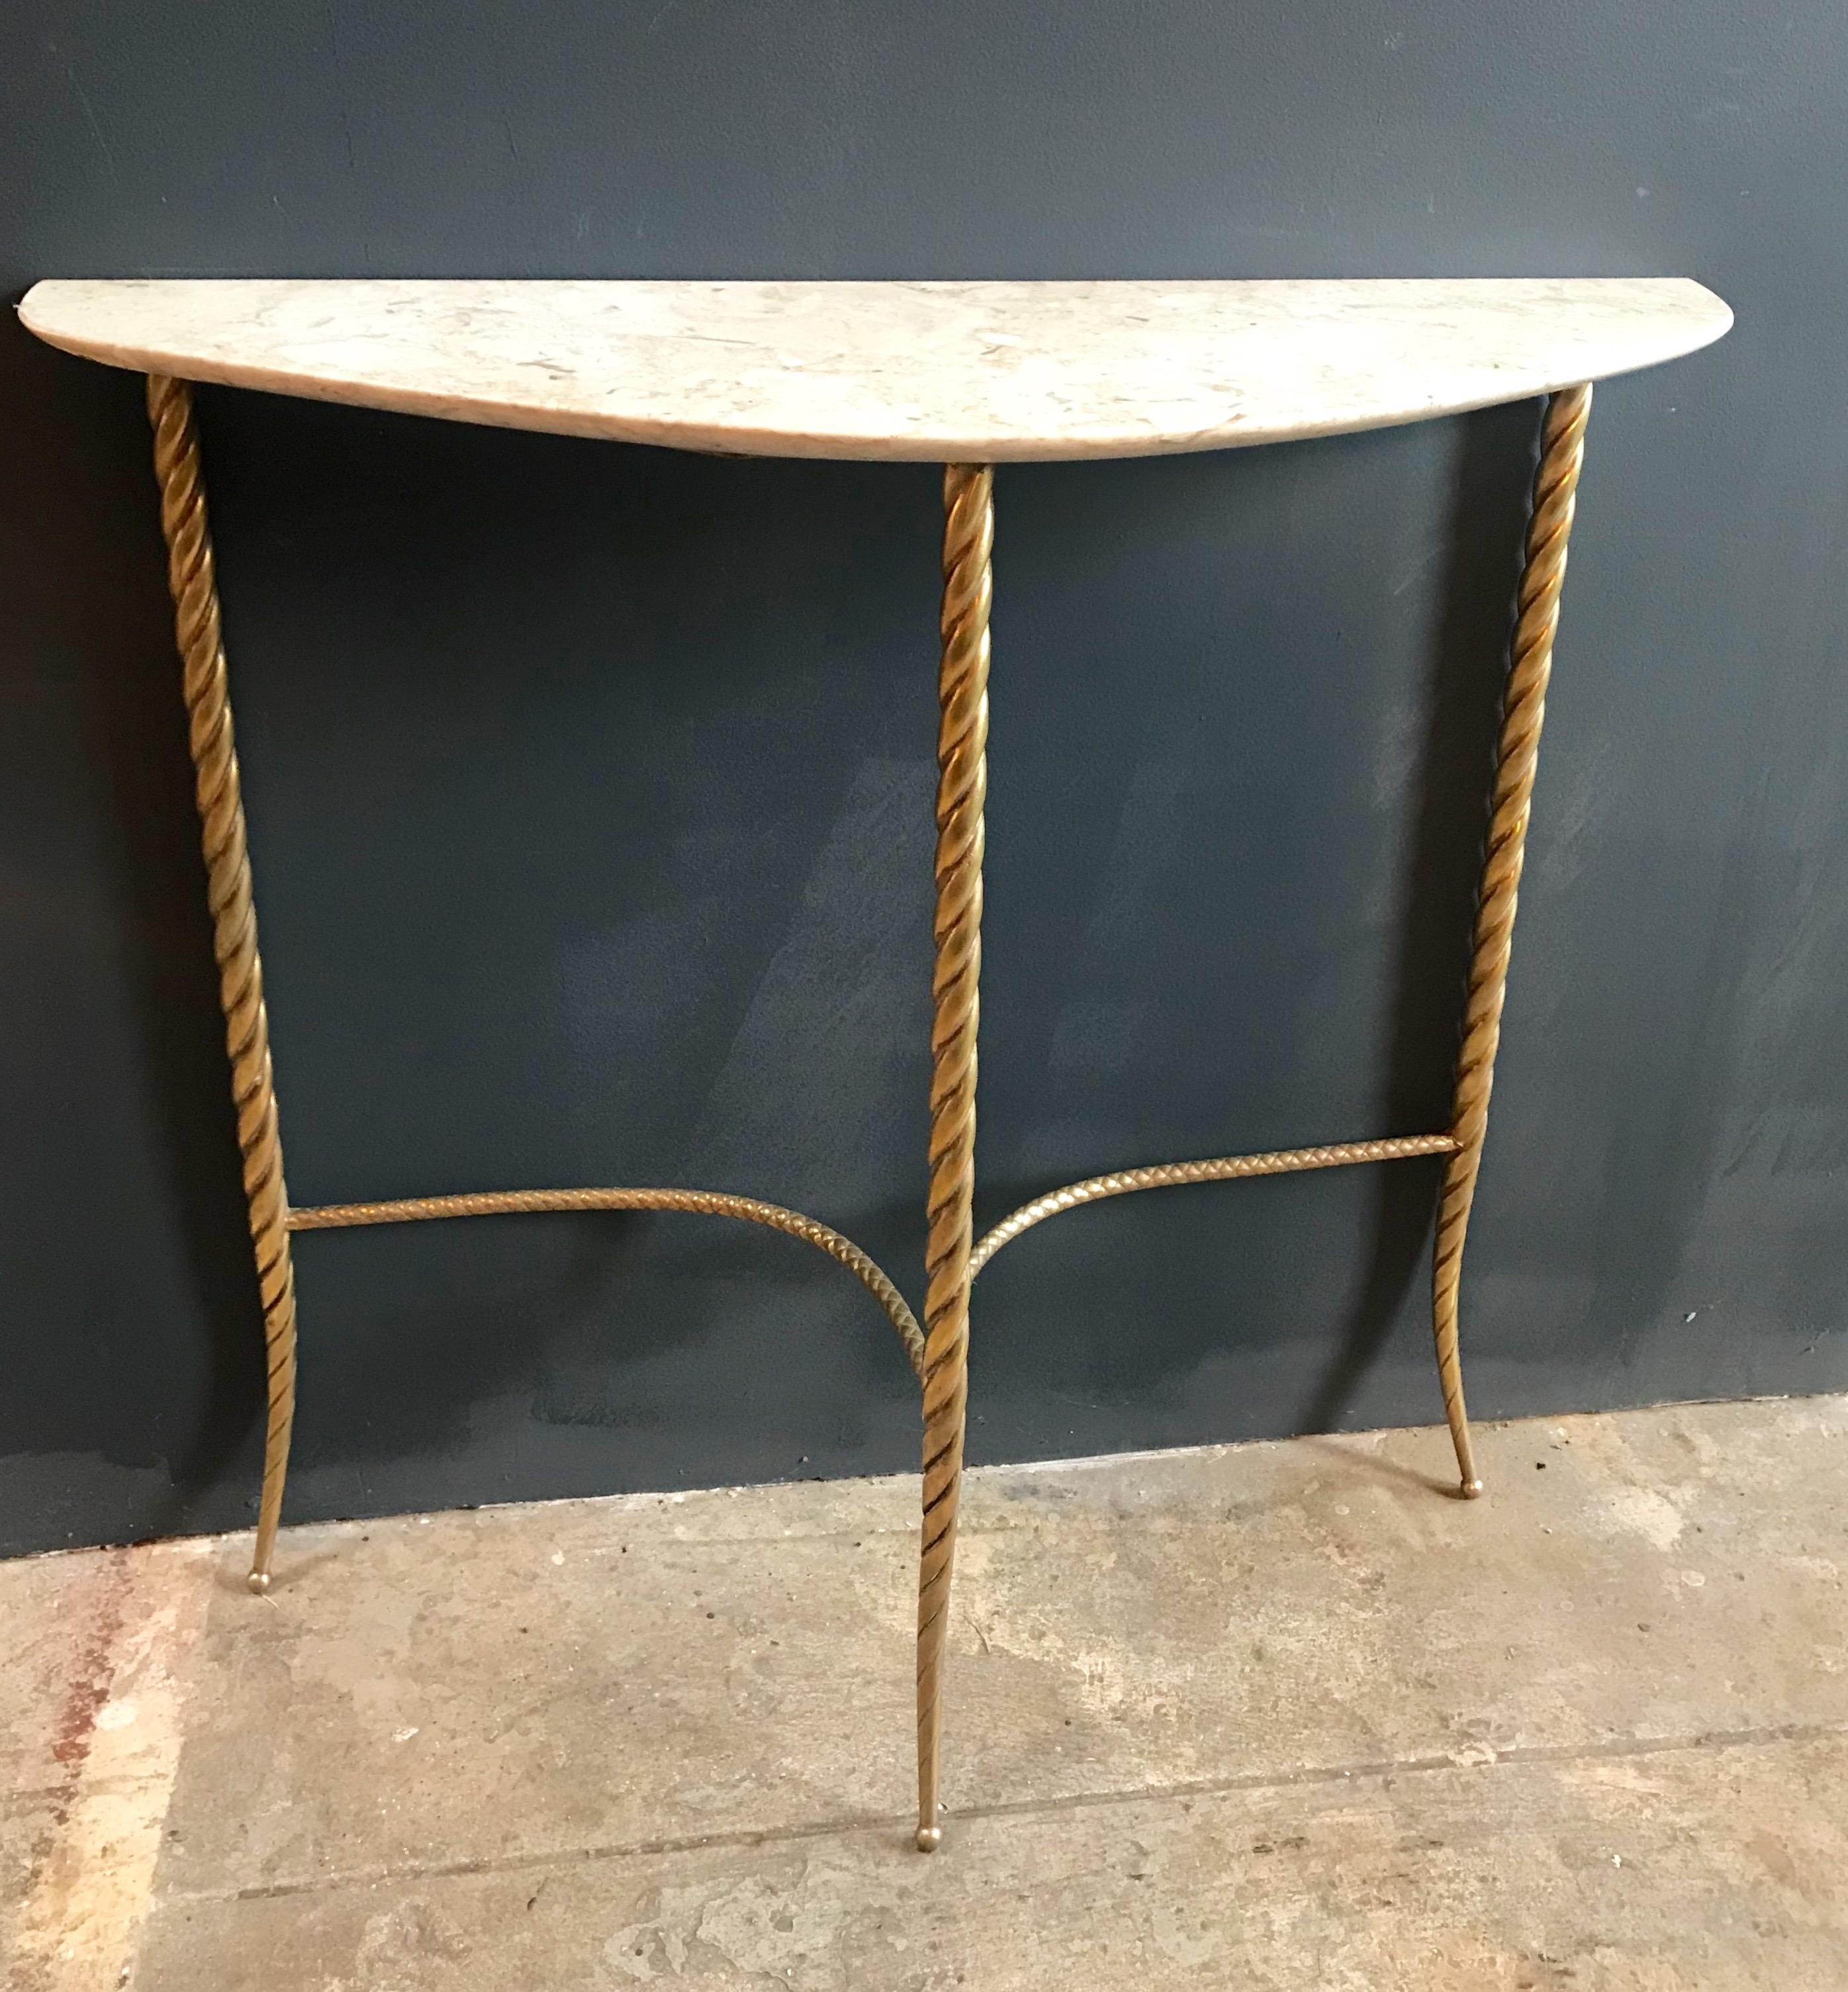 Mid-Century Modern Console Table with Marble Top and Brass Legs, Italy 1940s